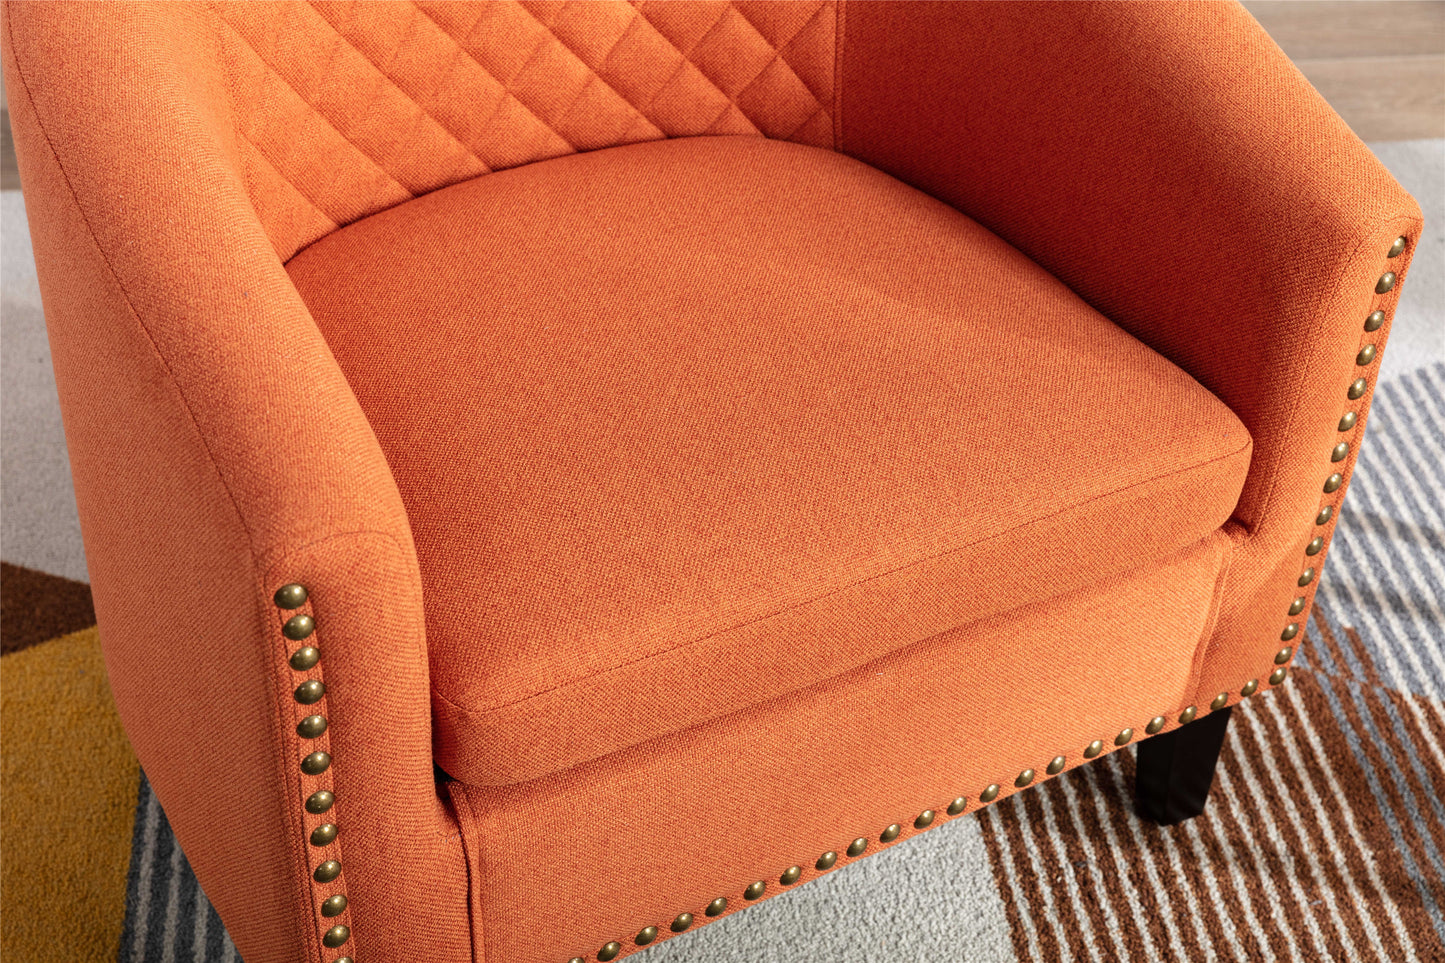 Accent Barrel Chair  Chair with Nailheads and Solid Wood Legs Orange Linen